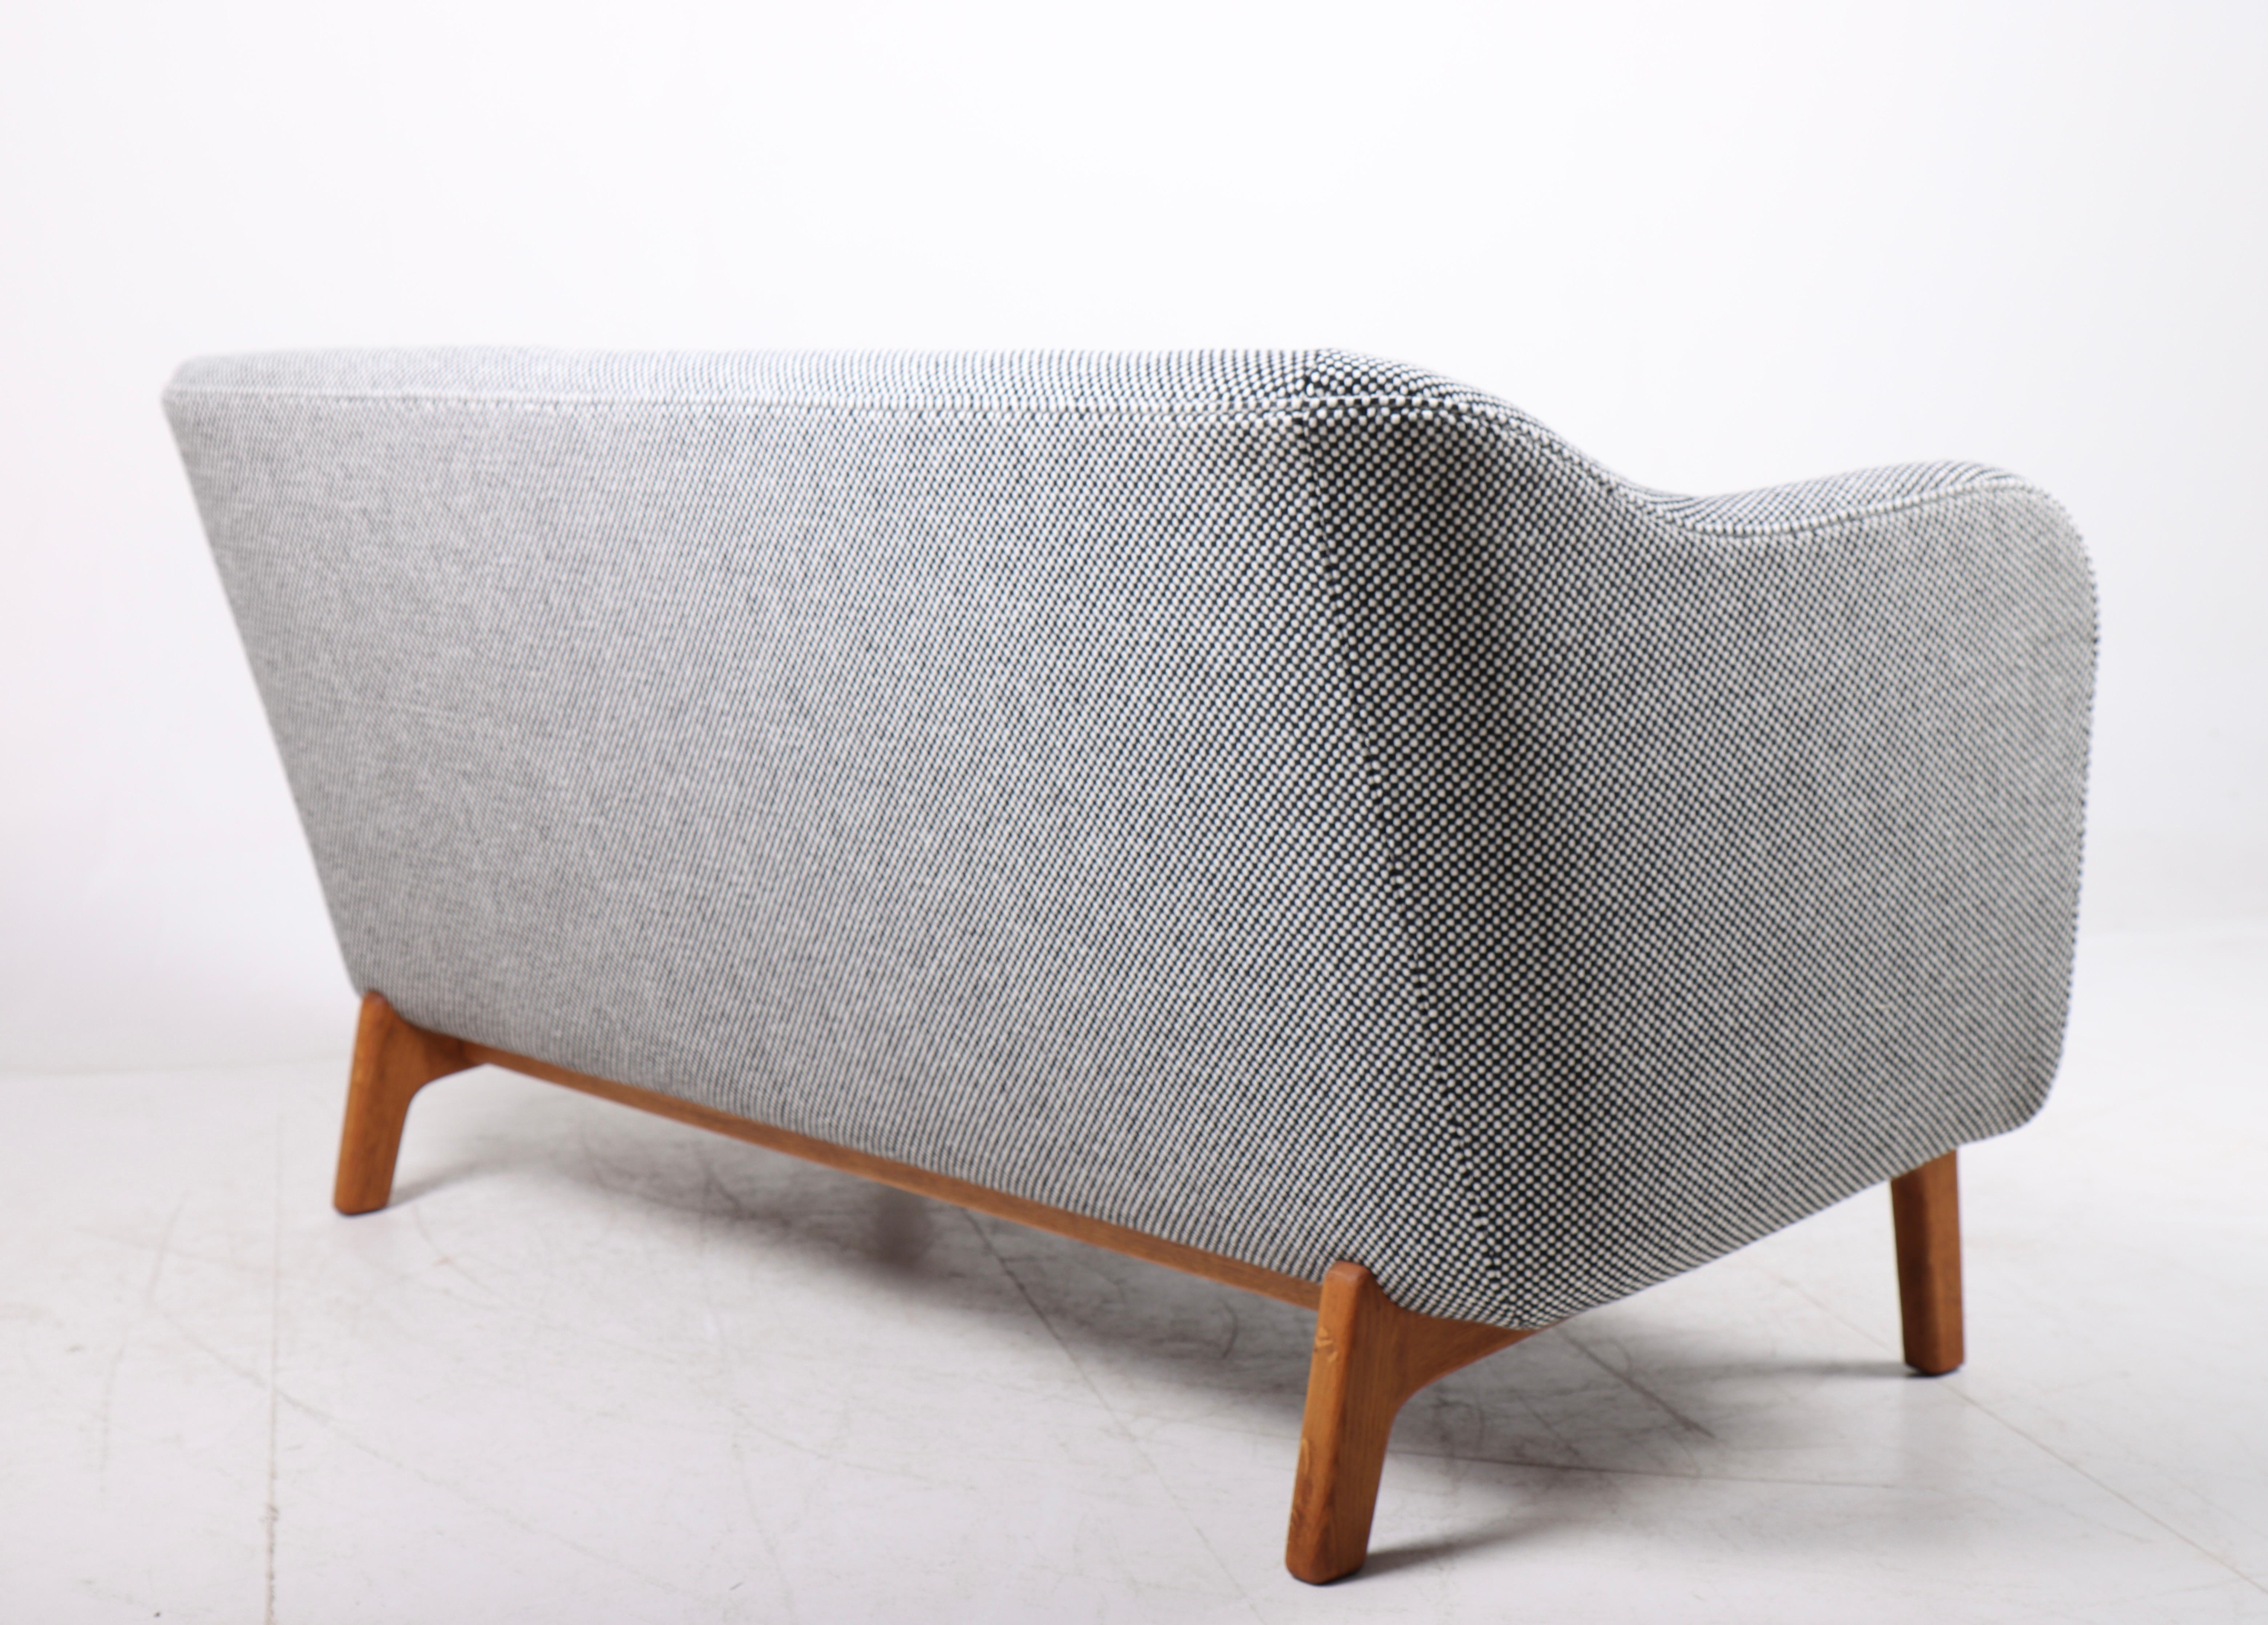 Fabric Rare Midcentury Sofa by Tove & Edvard Kindt Larsen, 1950s For Sale